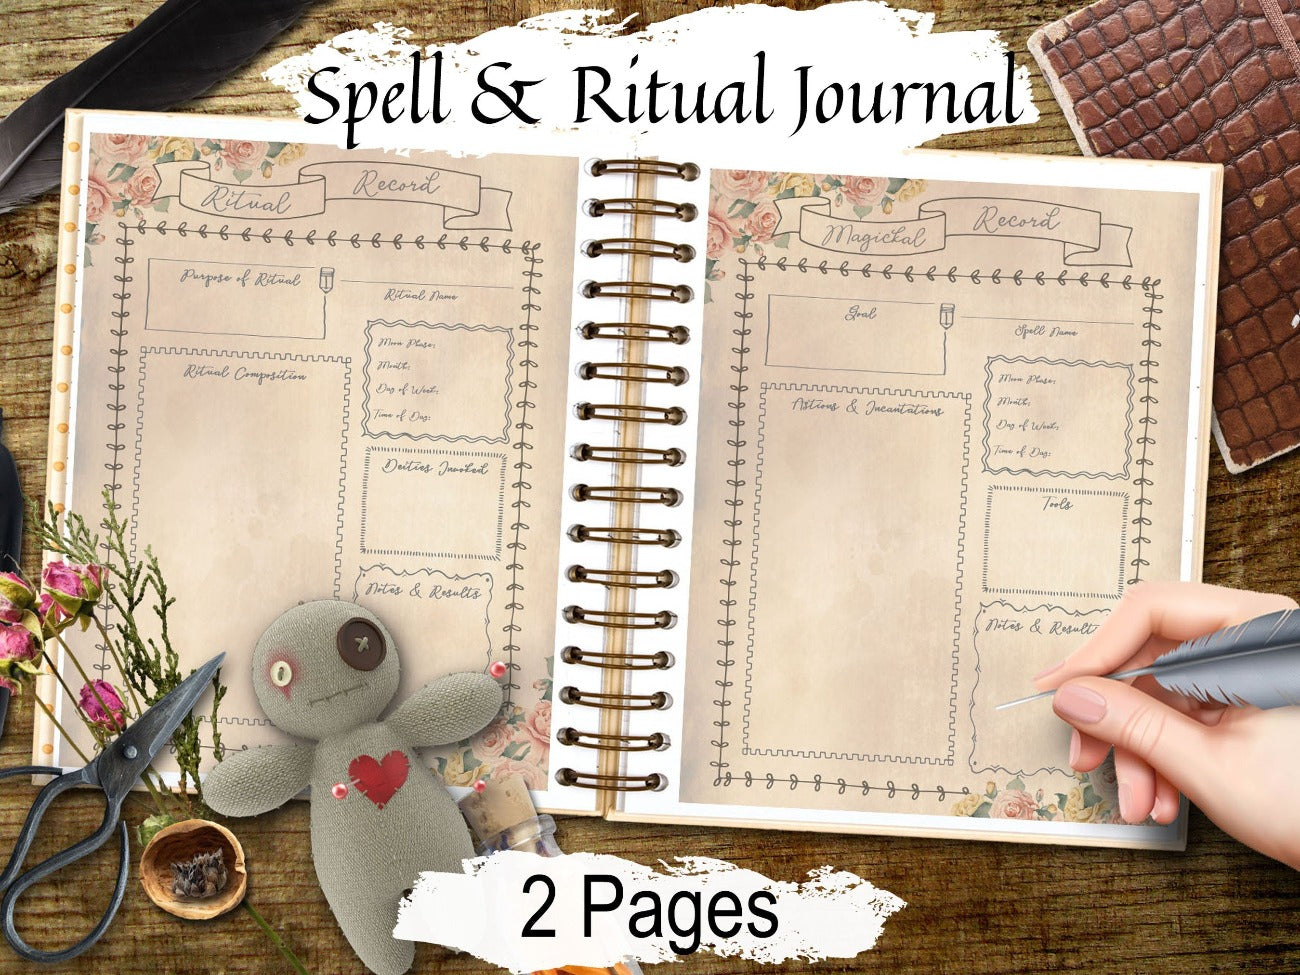 SPELL & RITUAL JOURNAL, Wicca Spell Record, Magical Witchcraft Diary, Grimoire Magic Guide, Book of Spells, Witch Book of Shadows, 2 Pages - Morgana Magick Spell